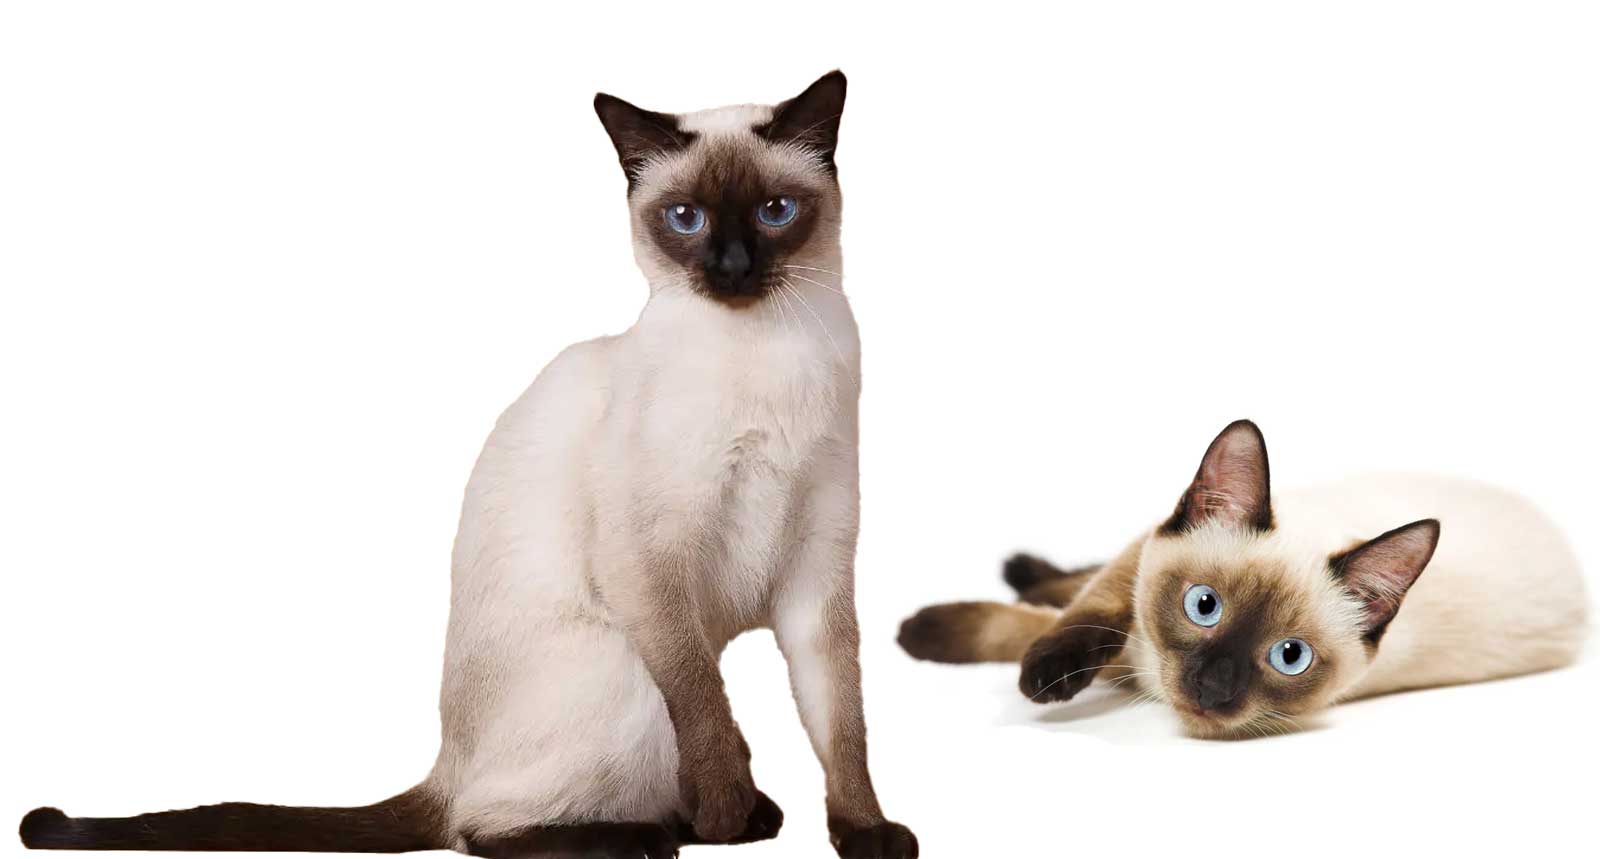 are siamese cats good mousers